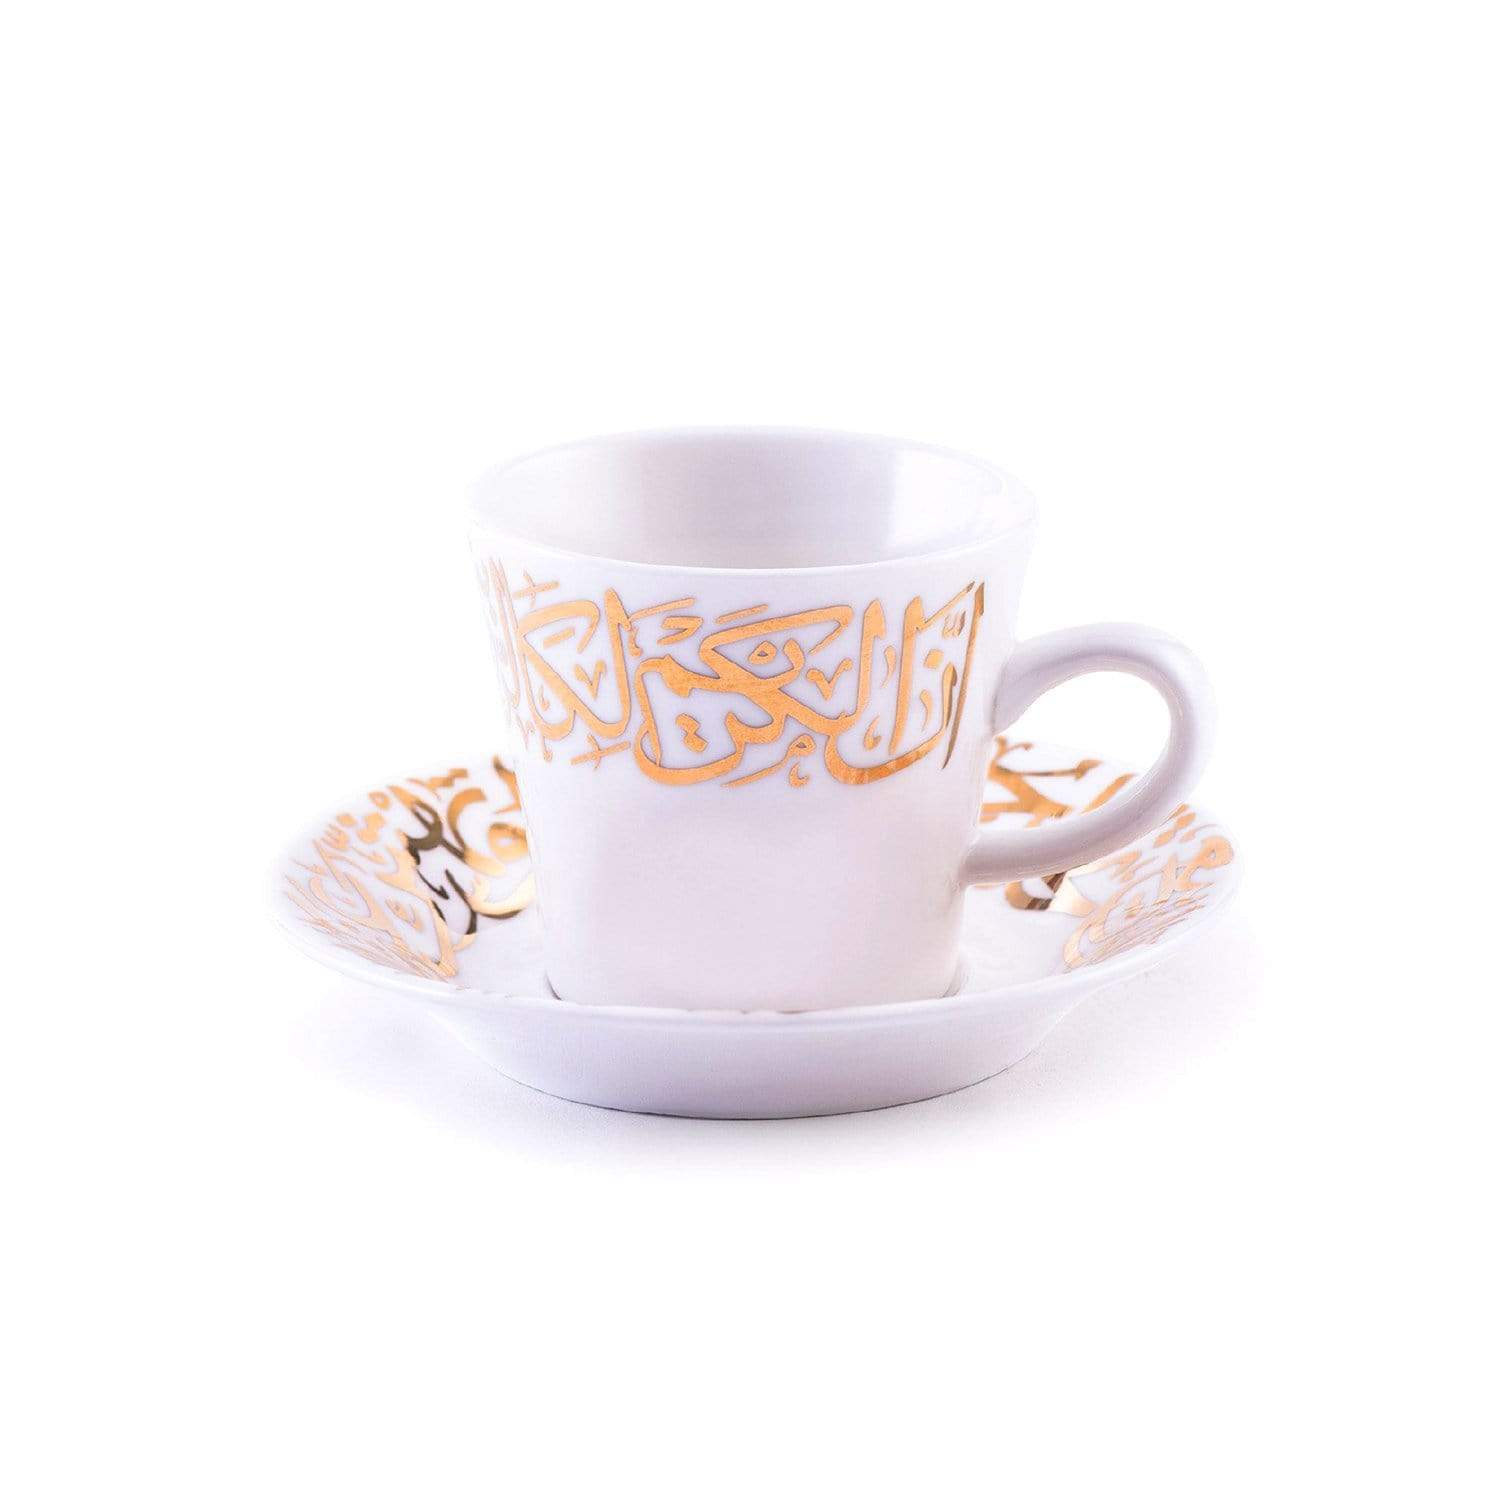 Dimlaj Kareem Coffee Cup and Saucer Set - White and Gold, 12 Pieces - 46666 - Jashanmal Home